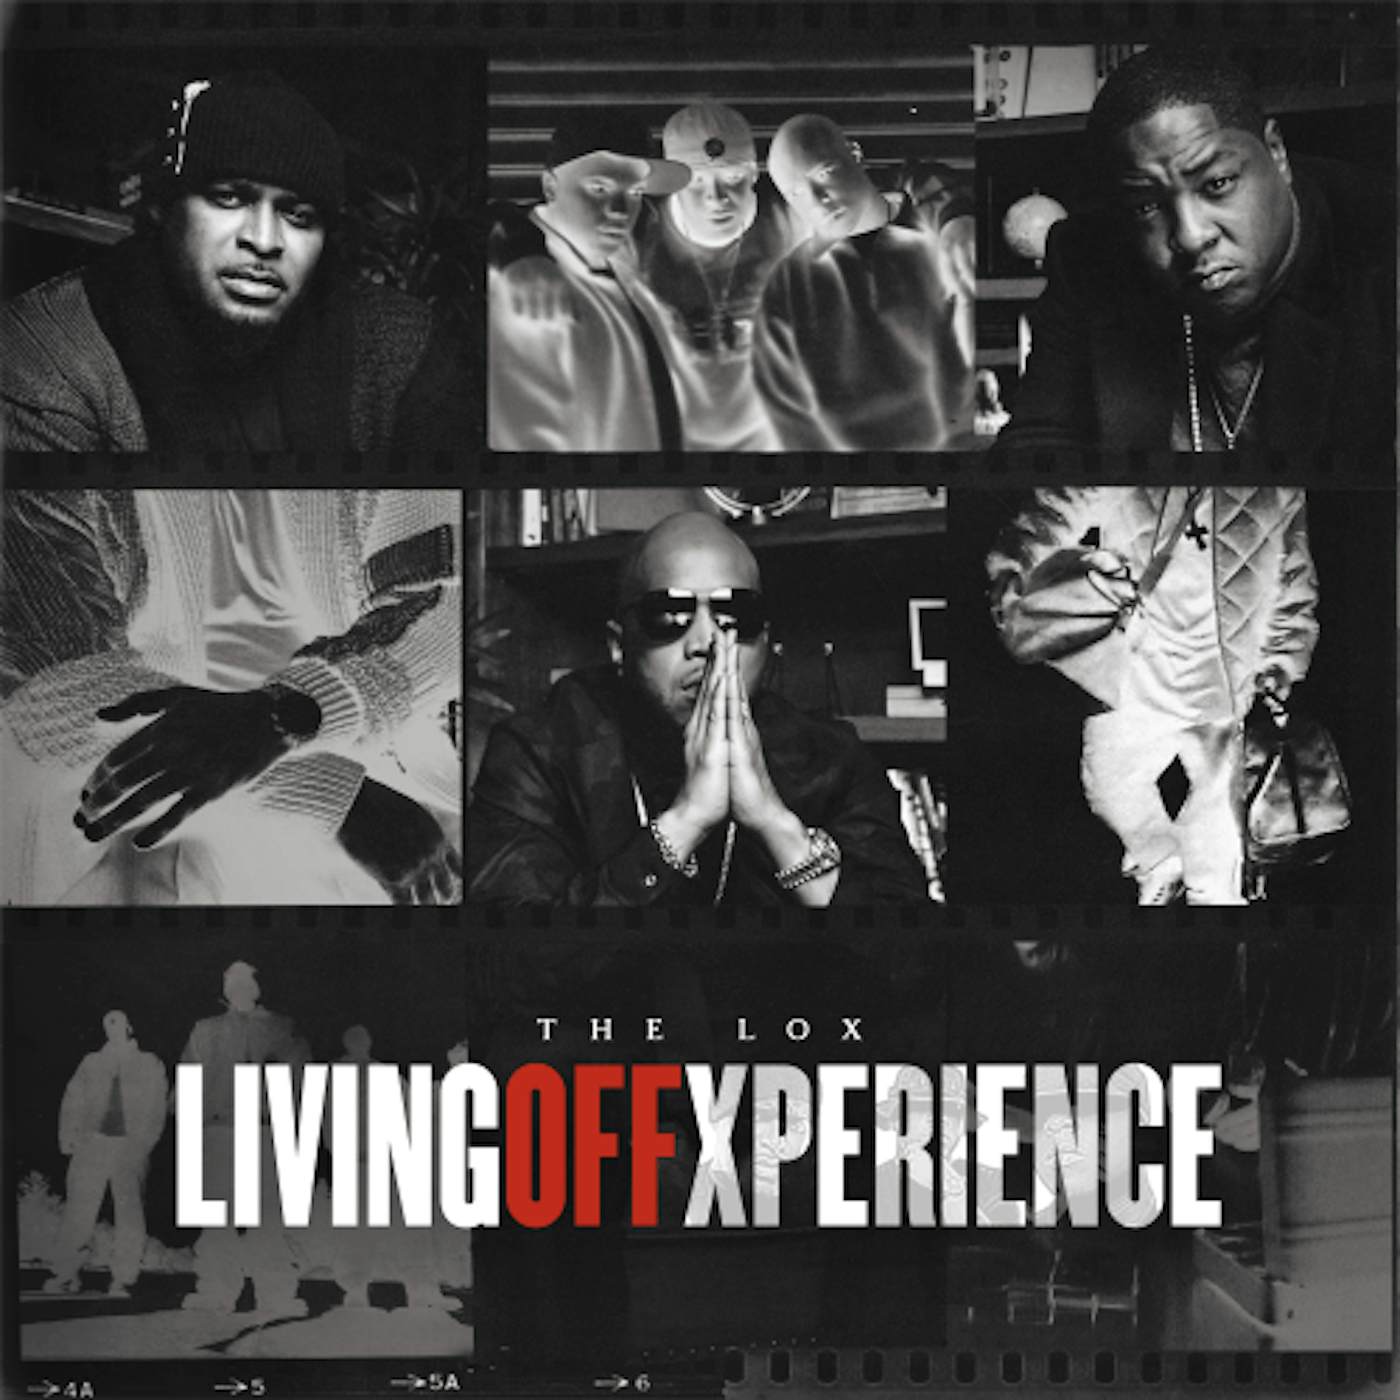 The LOX Living Off Xperience Vinyl Record